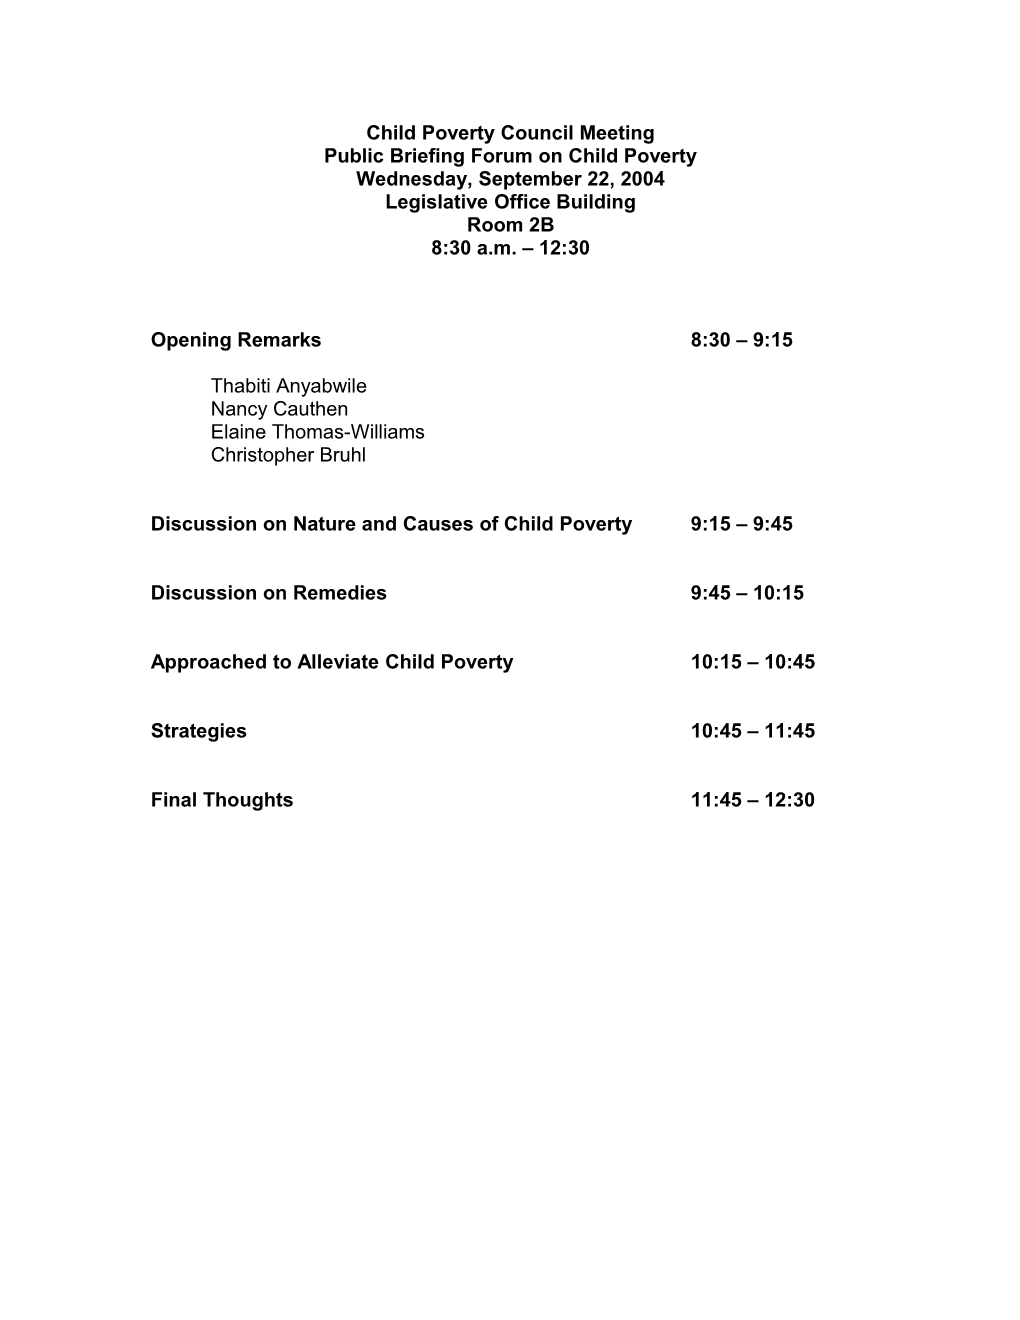 Child Poverty Council Meeting Minutes Sept 2004